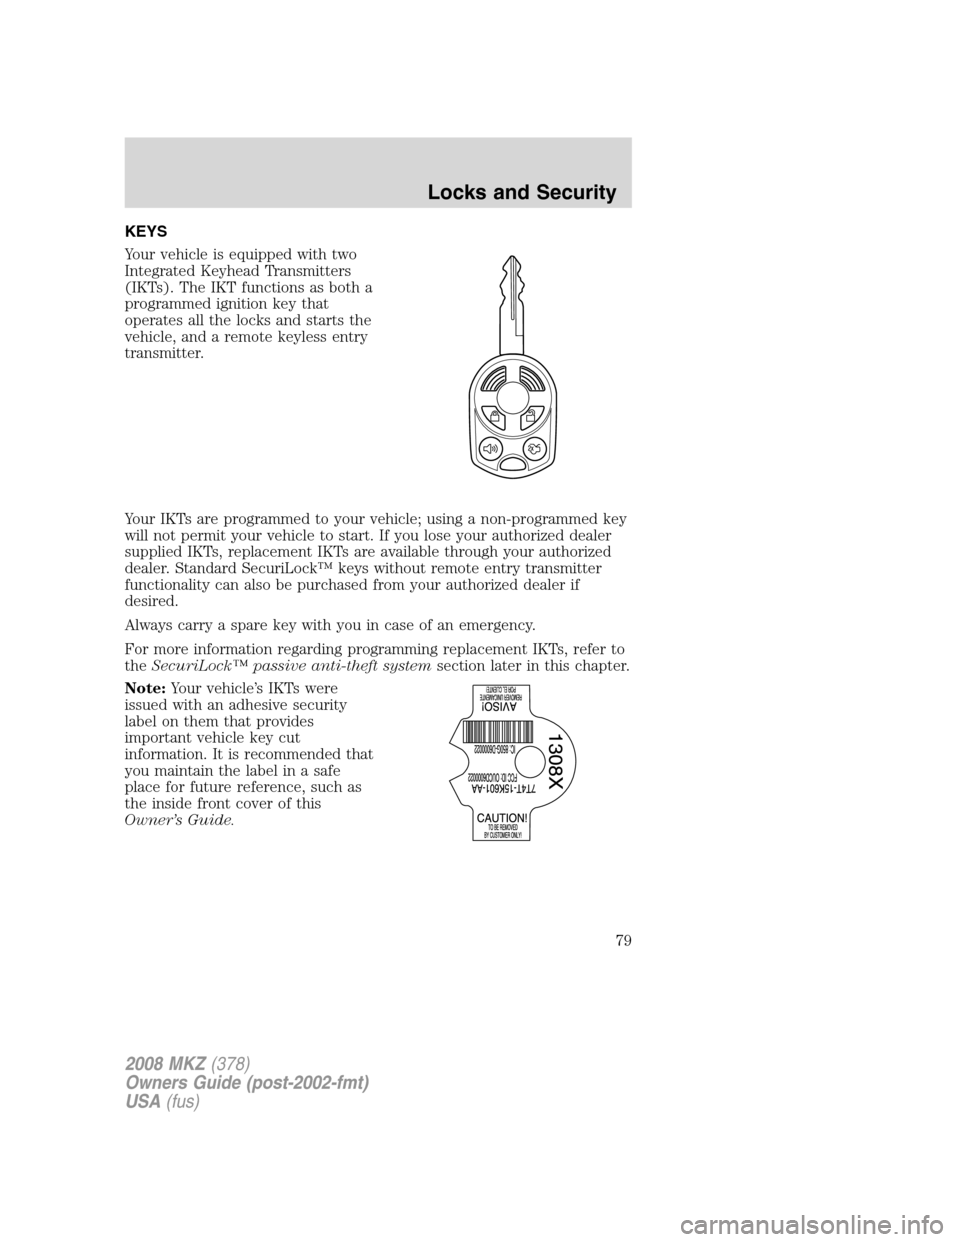 LINCOLN MKZ 2008  Owners Manual KEYS
Your vehicle is equipped with two
Integrated Keyhead Transmitters
(IKTs). The IKT functions as both a
programmed ignition key that
operates all the locks and starts the
vehicle, and a remote keyl